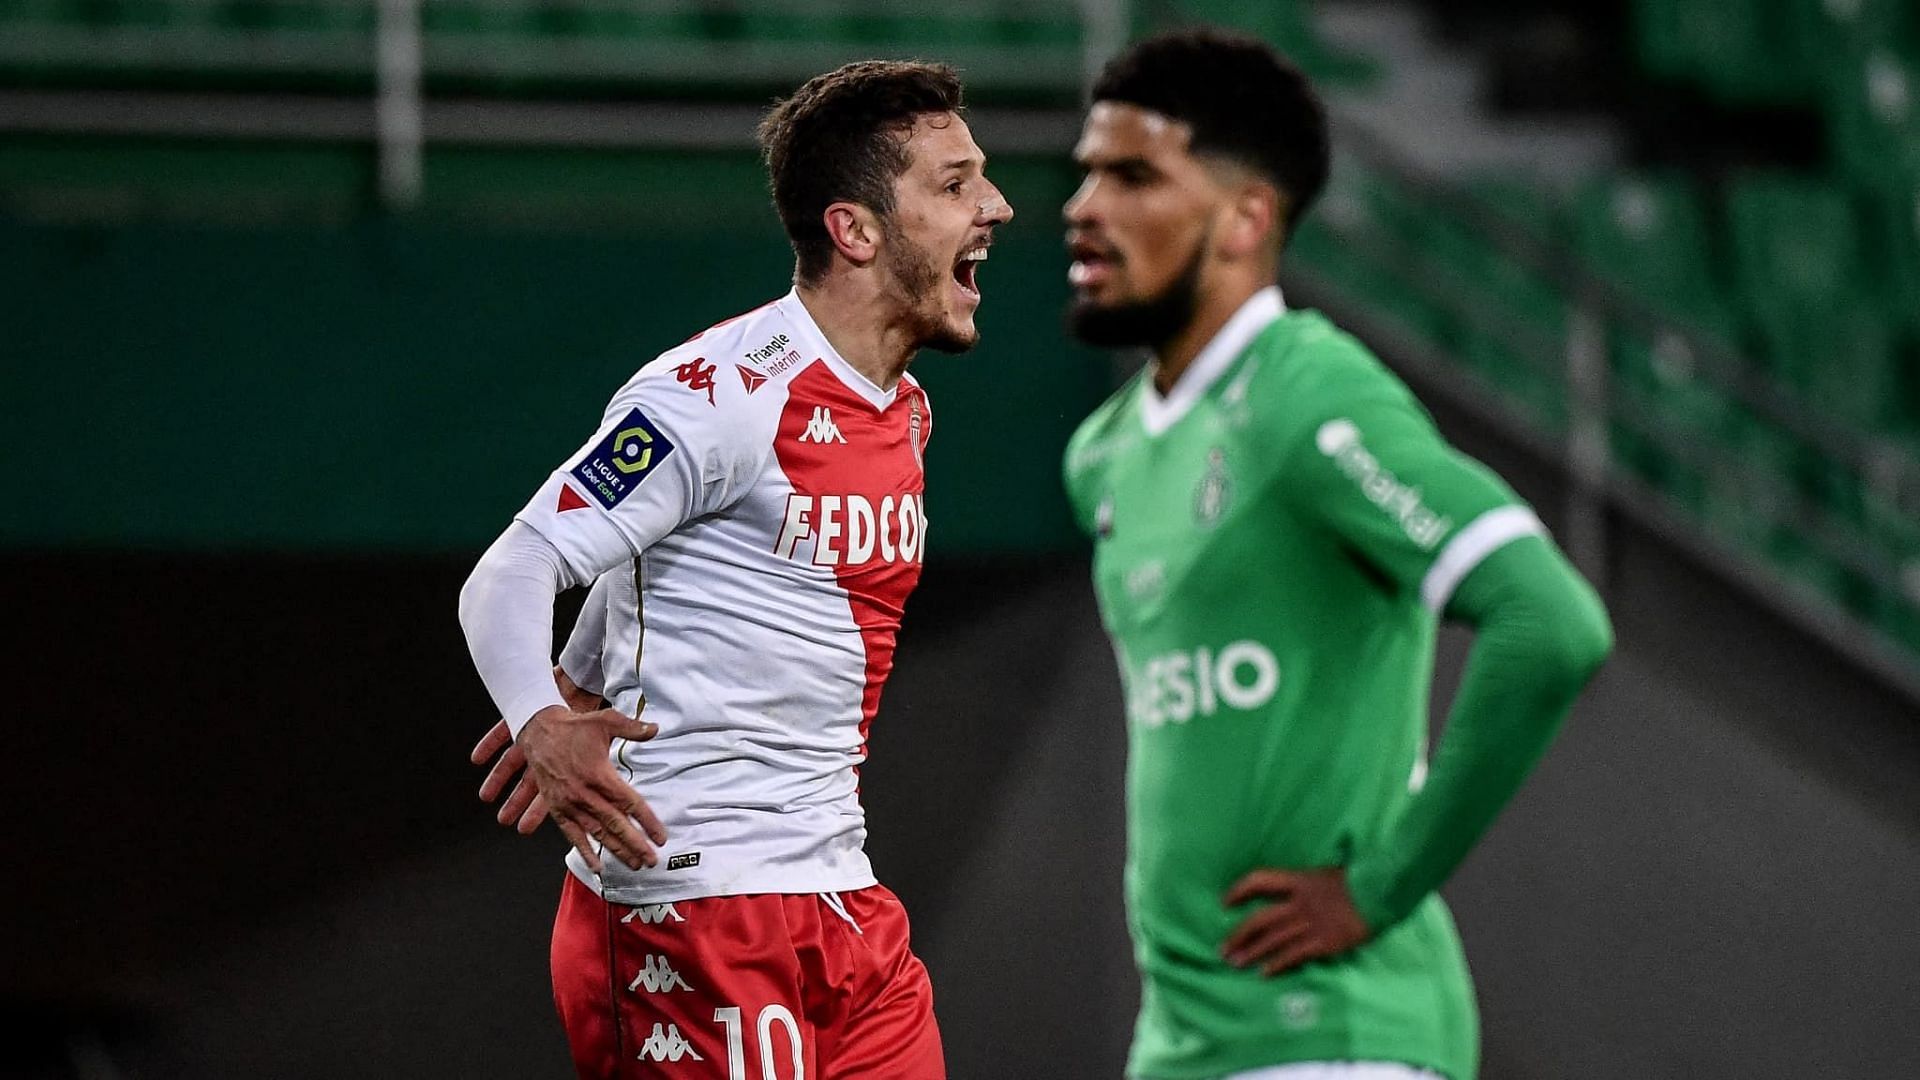 Monaco are back in Ligue 1 action against St-Etienne